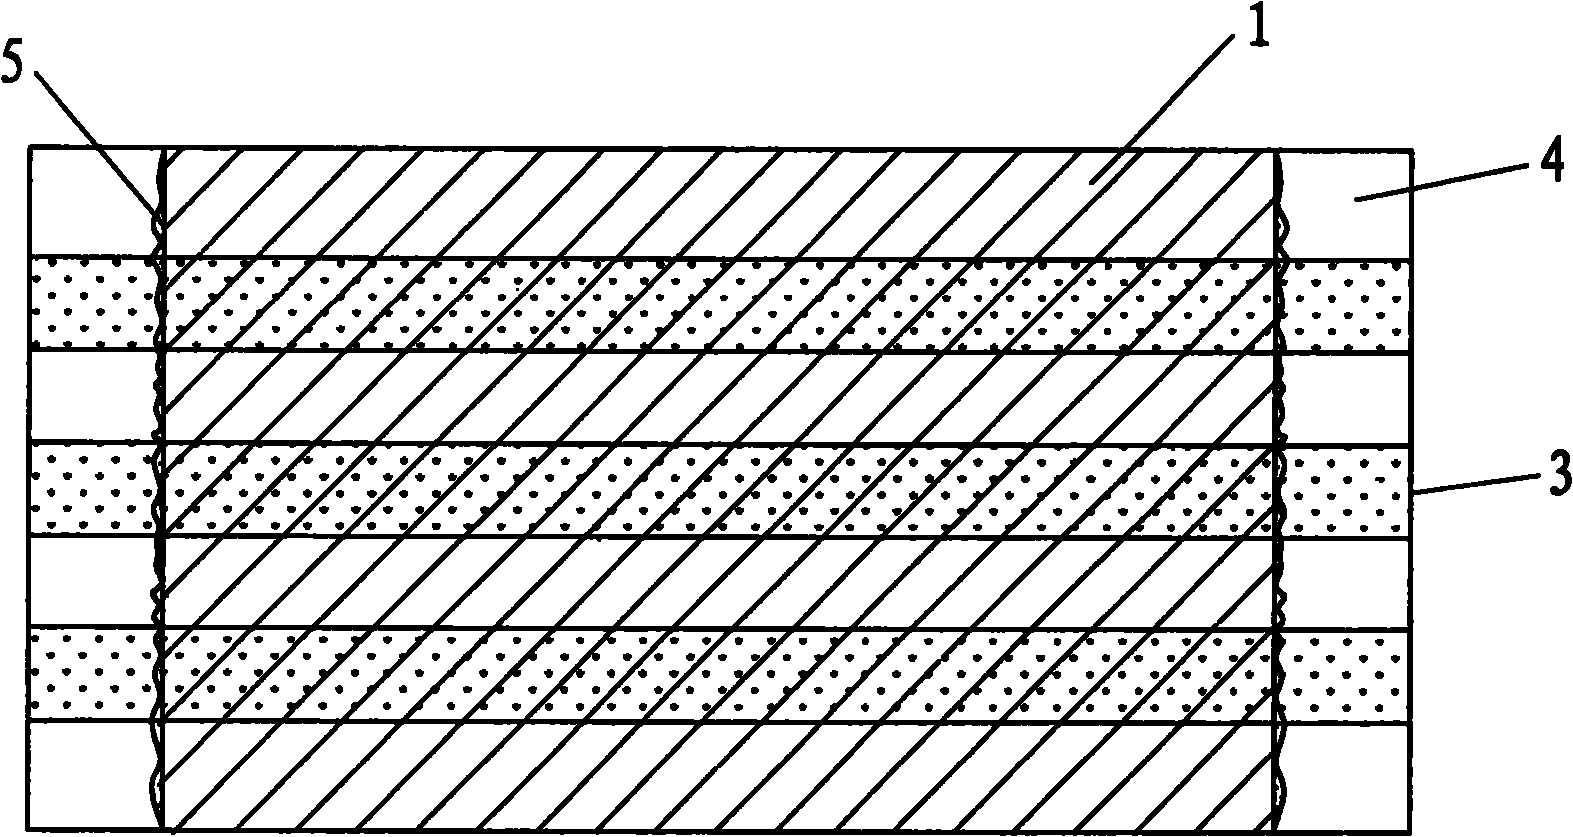 Manufacture method of single-sided flexible circuit board